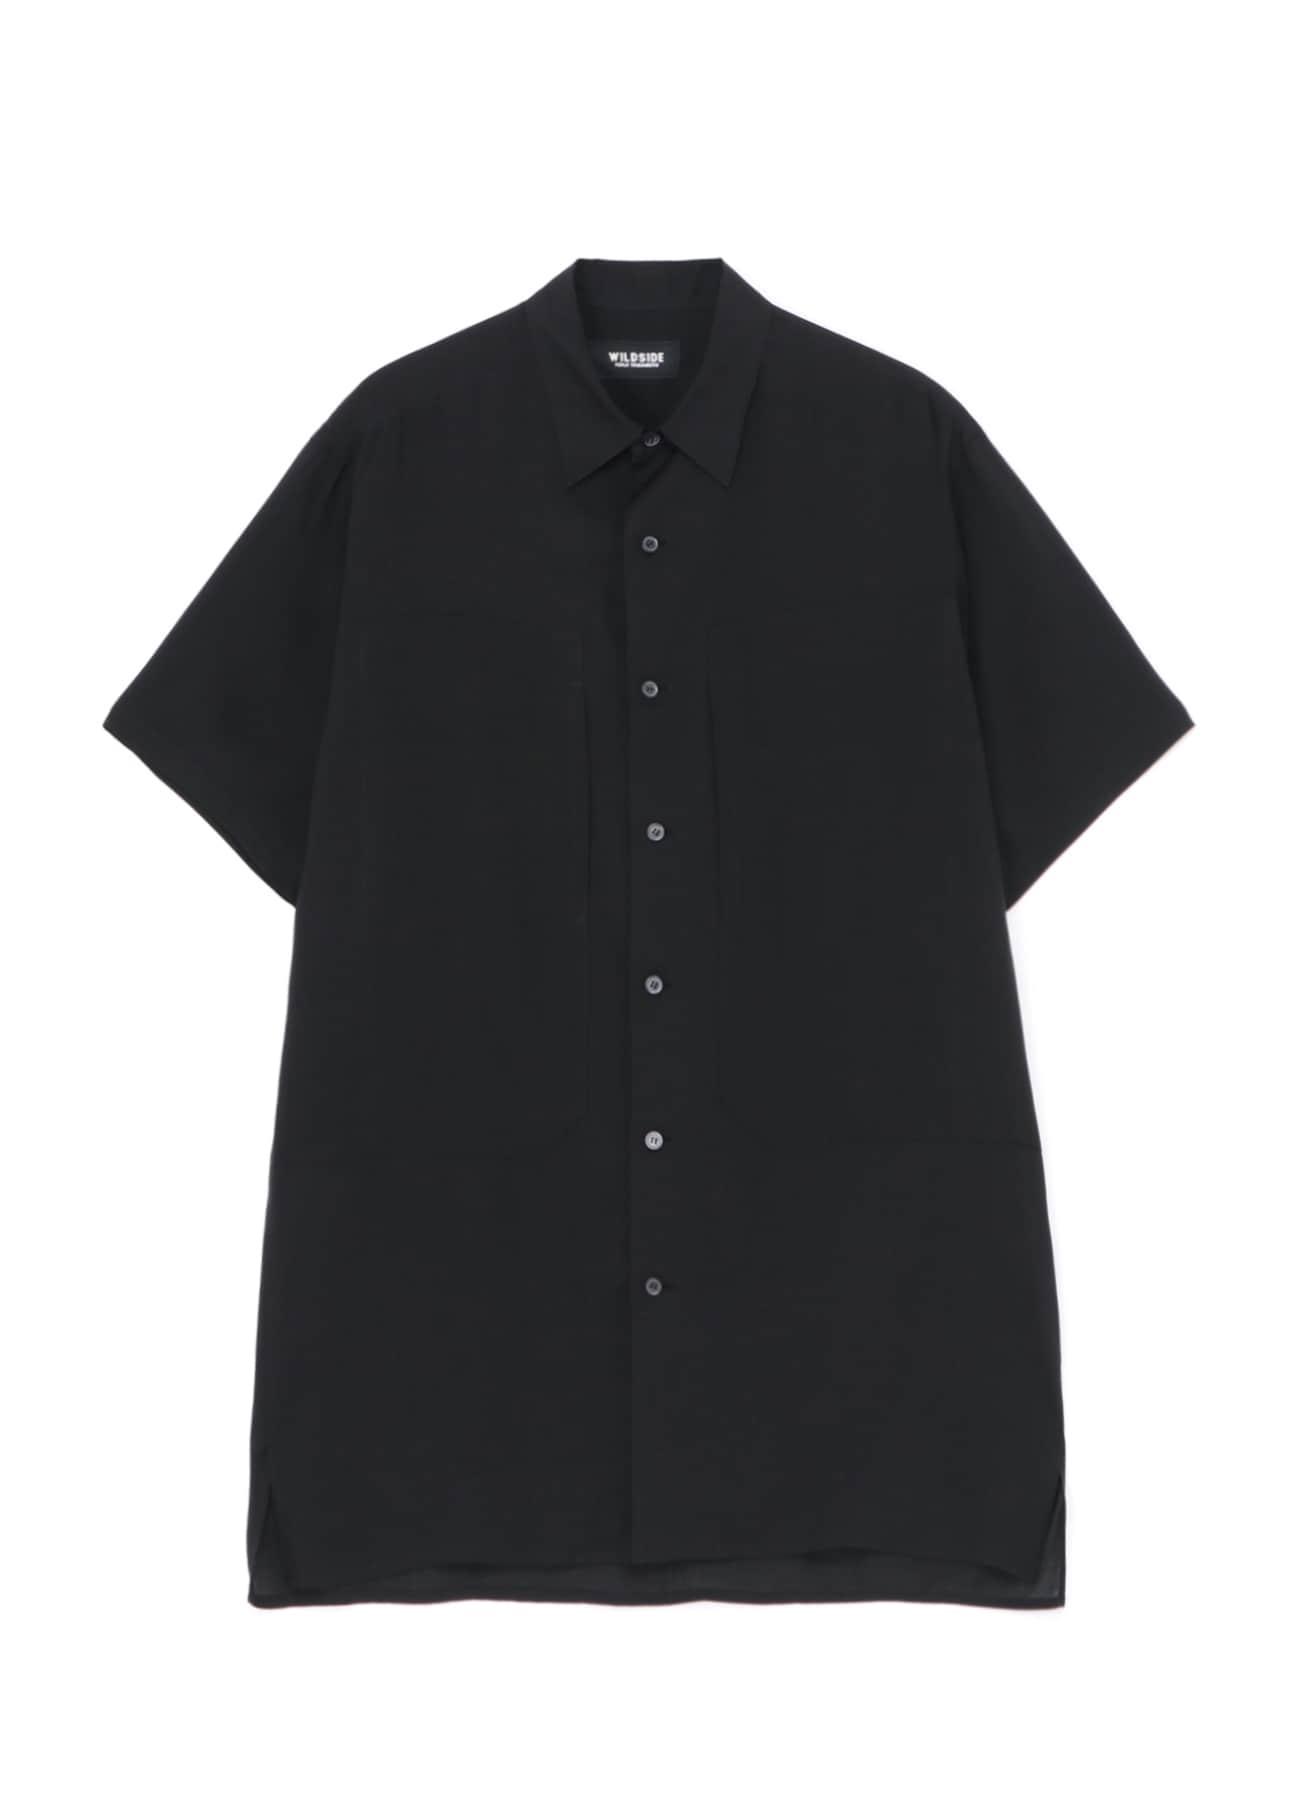 Cellulose Double Patch Pocket Short Sleeve Shirt